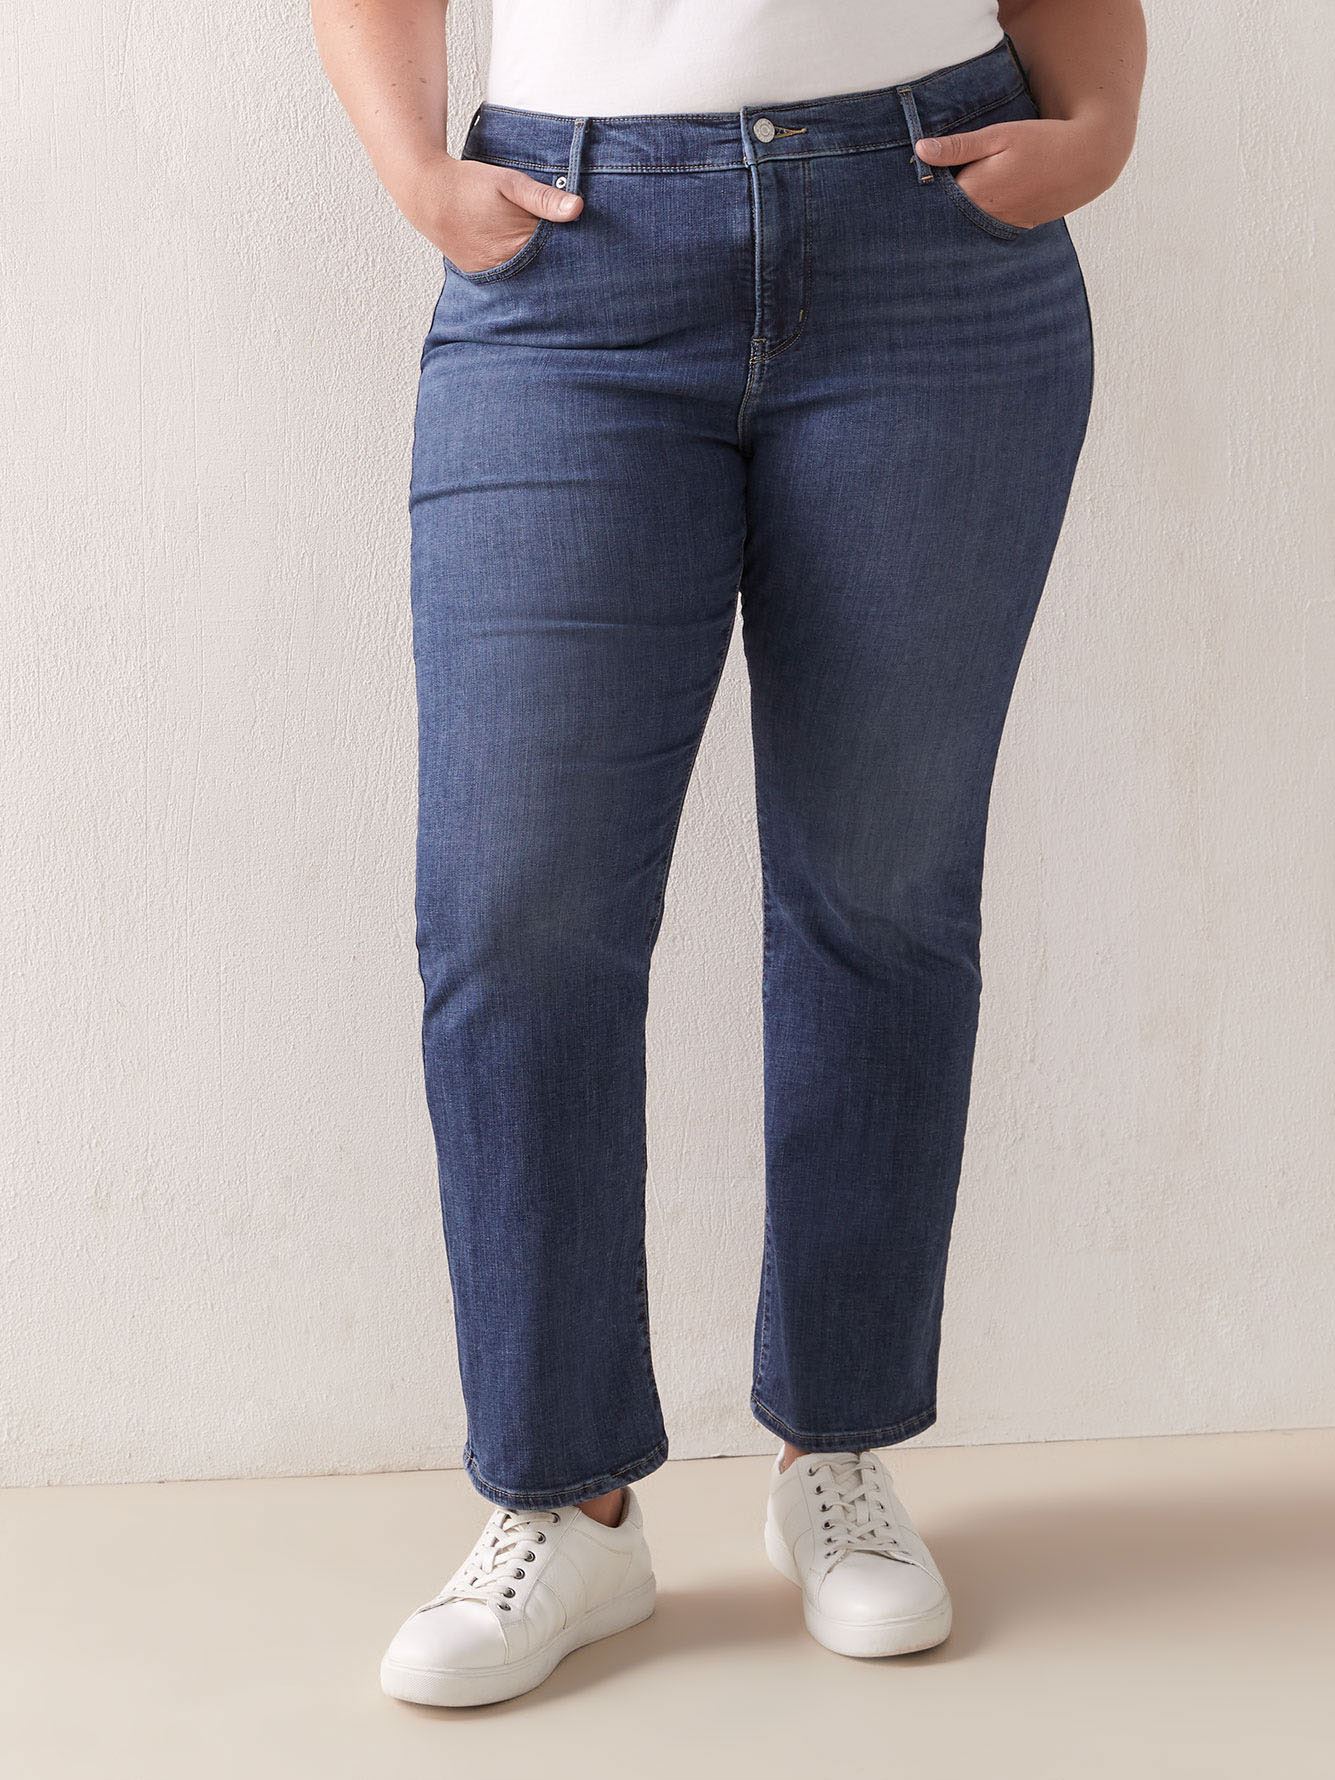 Stretchy 315 Shaping Bootcut Jean - Levi's Premium | Penningtons